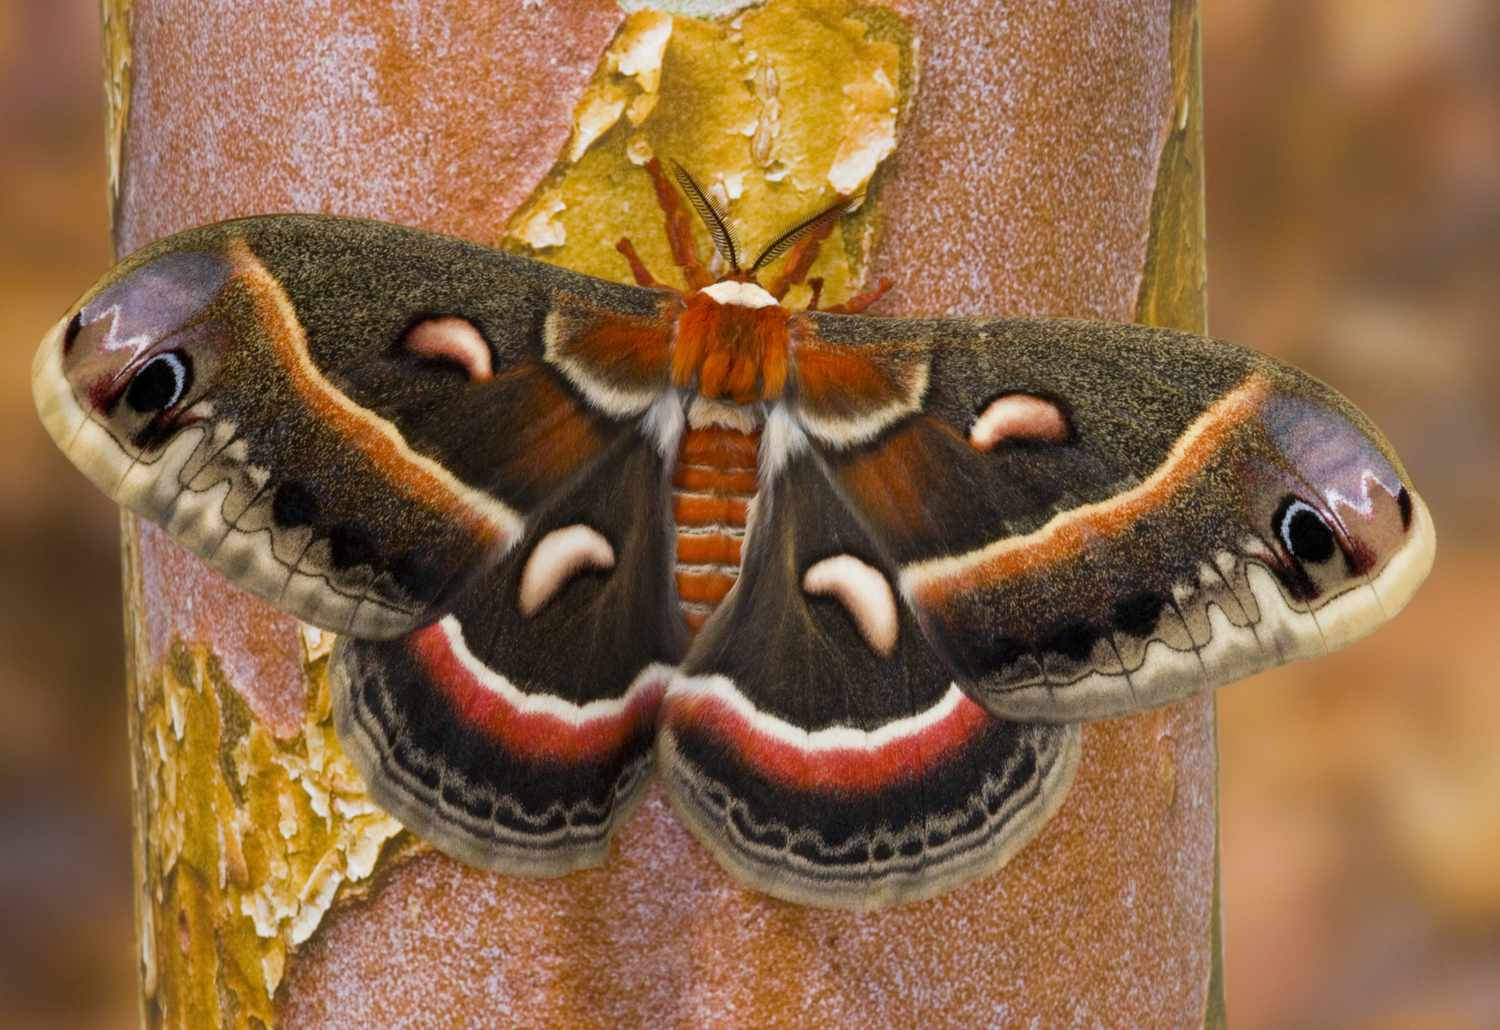 Striking Giant Cecropia Silkmoth Insect Wallpaper